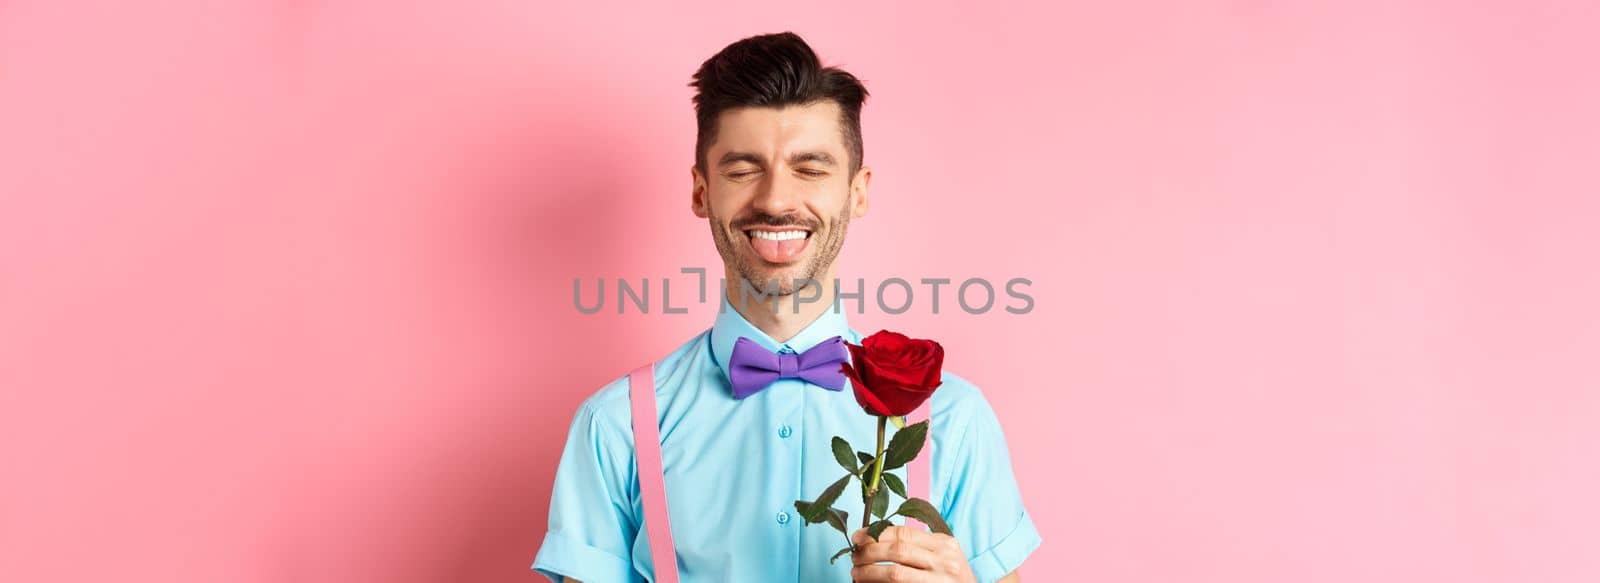 Happy man showing tongue and smiling, holding red rose for girlfriend on Valentines day, enjoying romantic date, pink background.